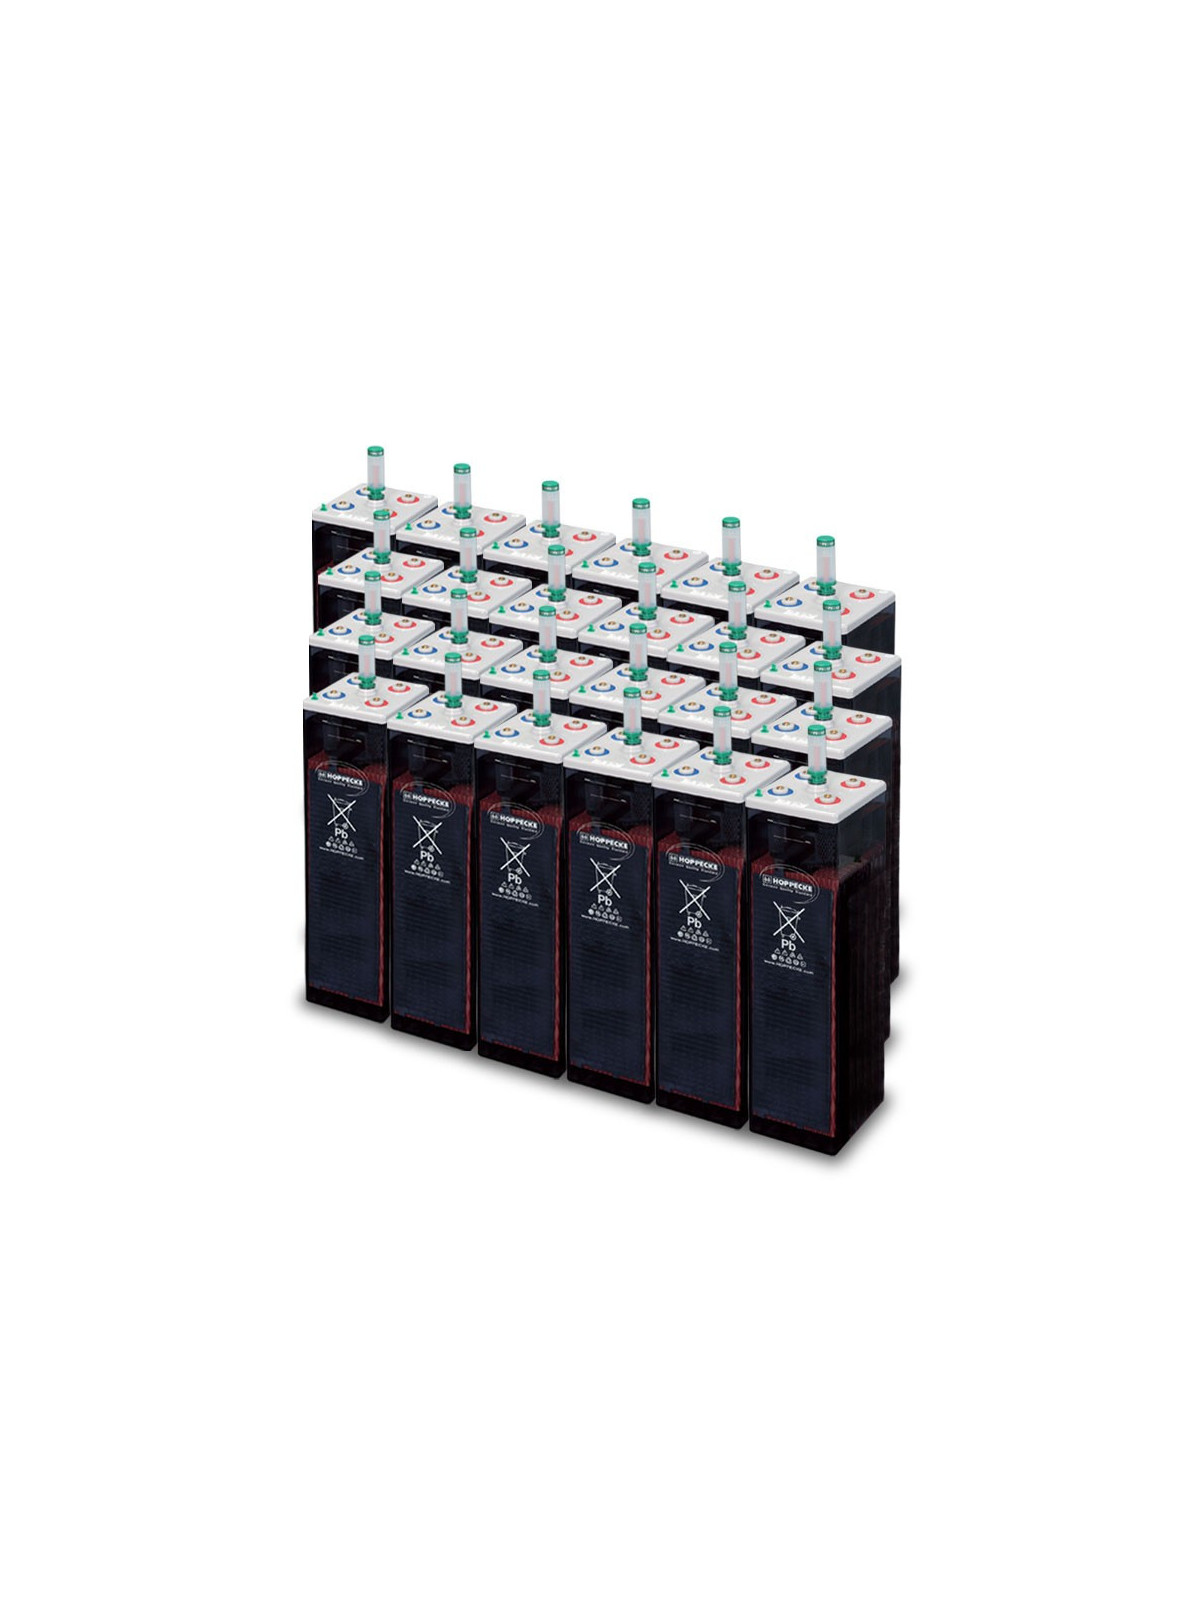 120 kWh OPzS 48V battery pack